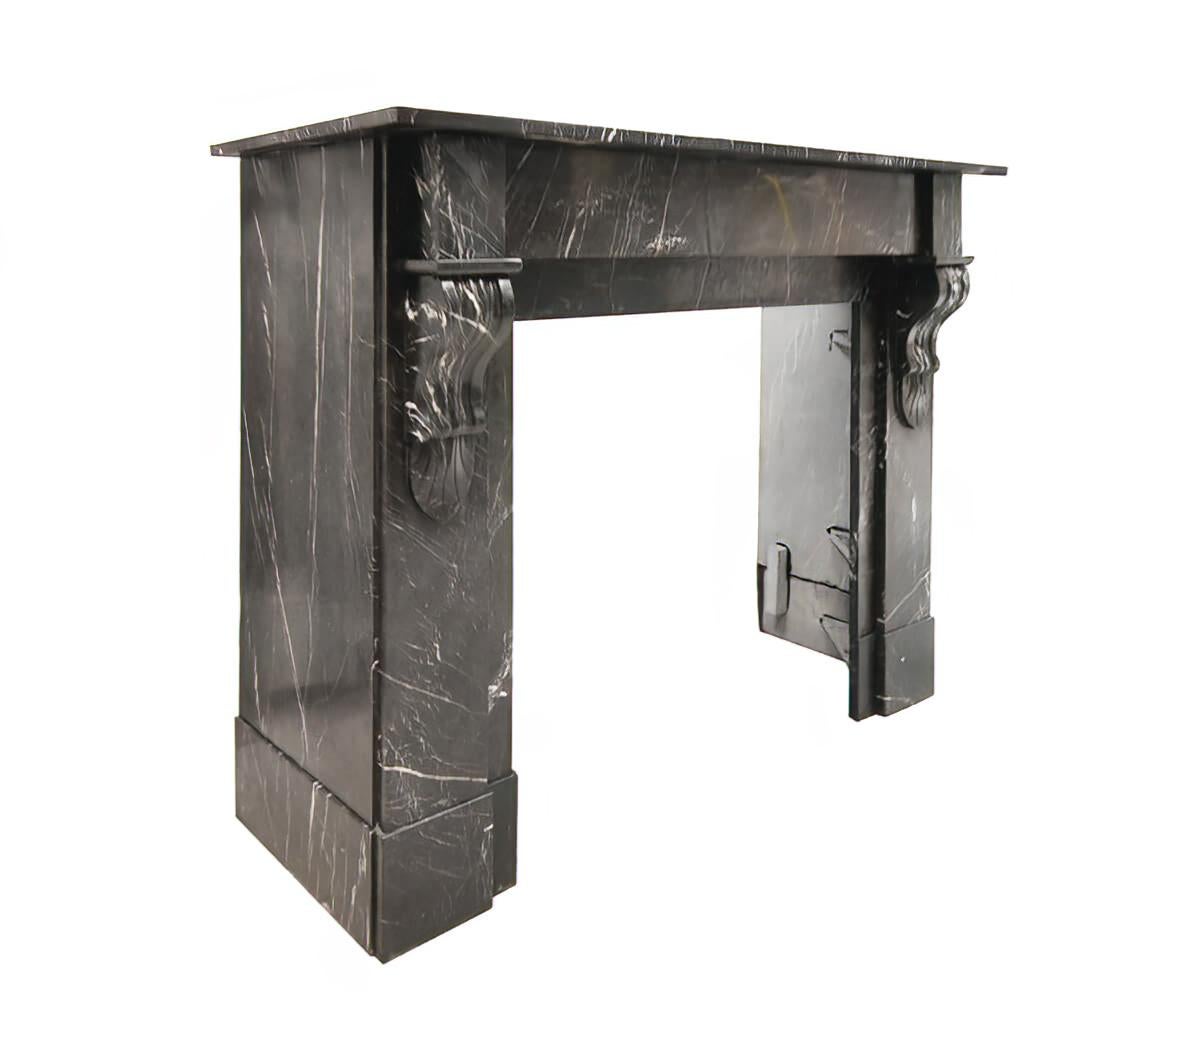 Black-veined marble Modillion fireplace mantel from the early
20th Century to place around the chimney.
See all dimensions in the last picture.